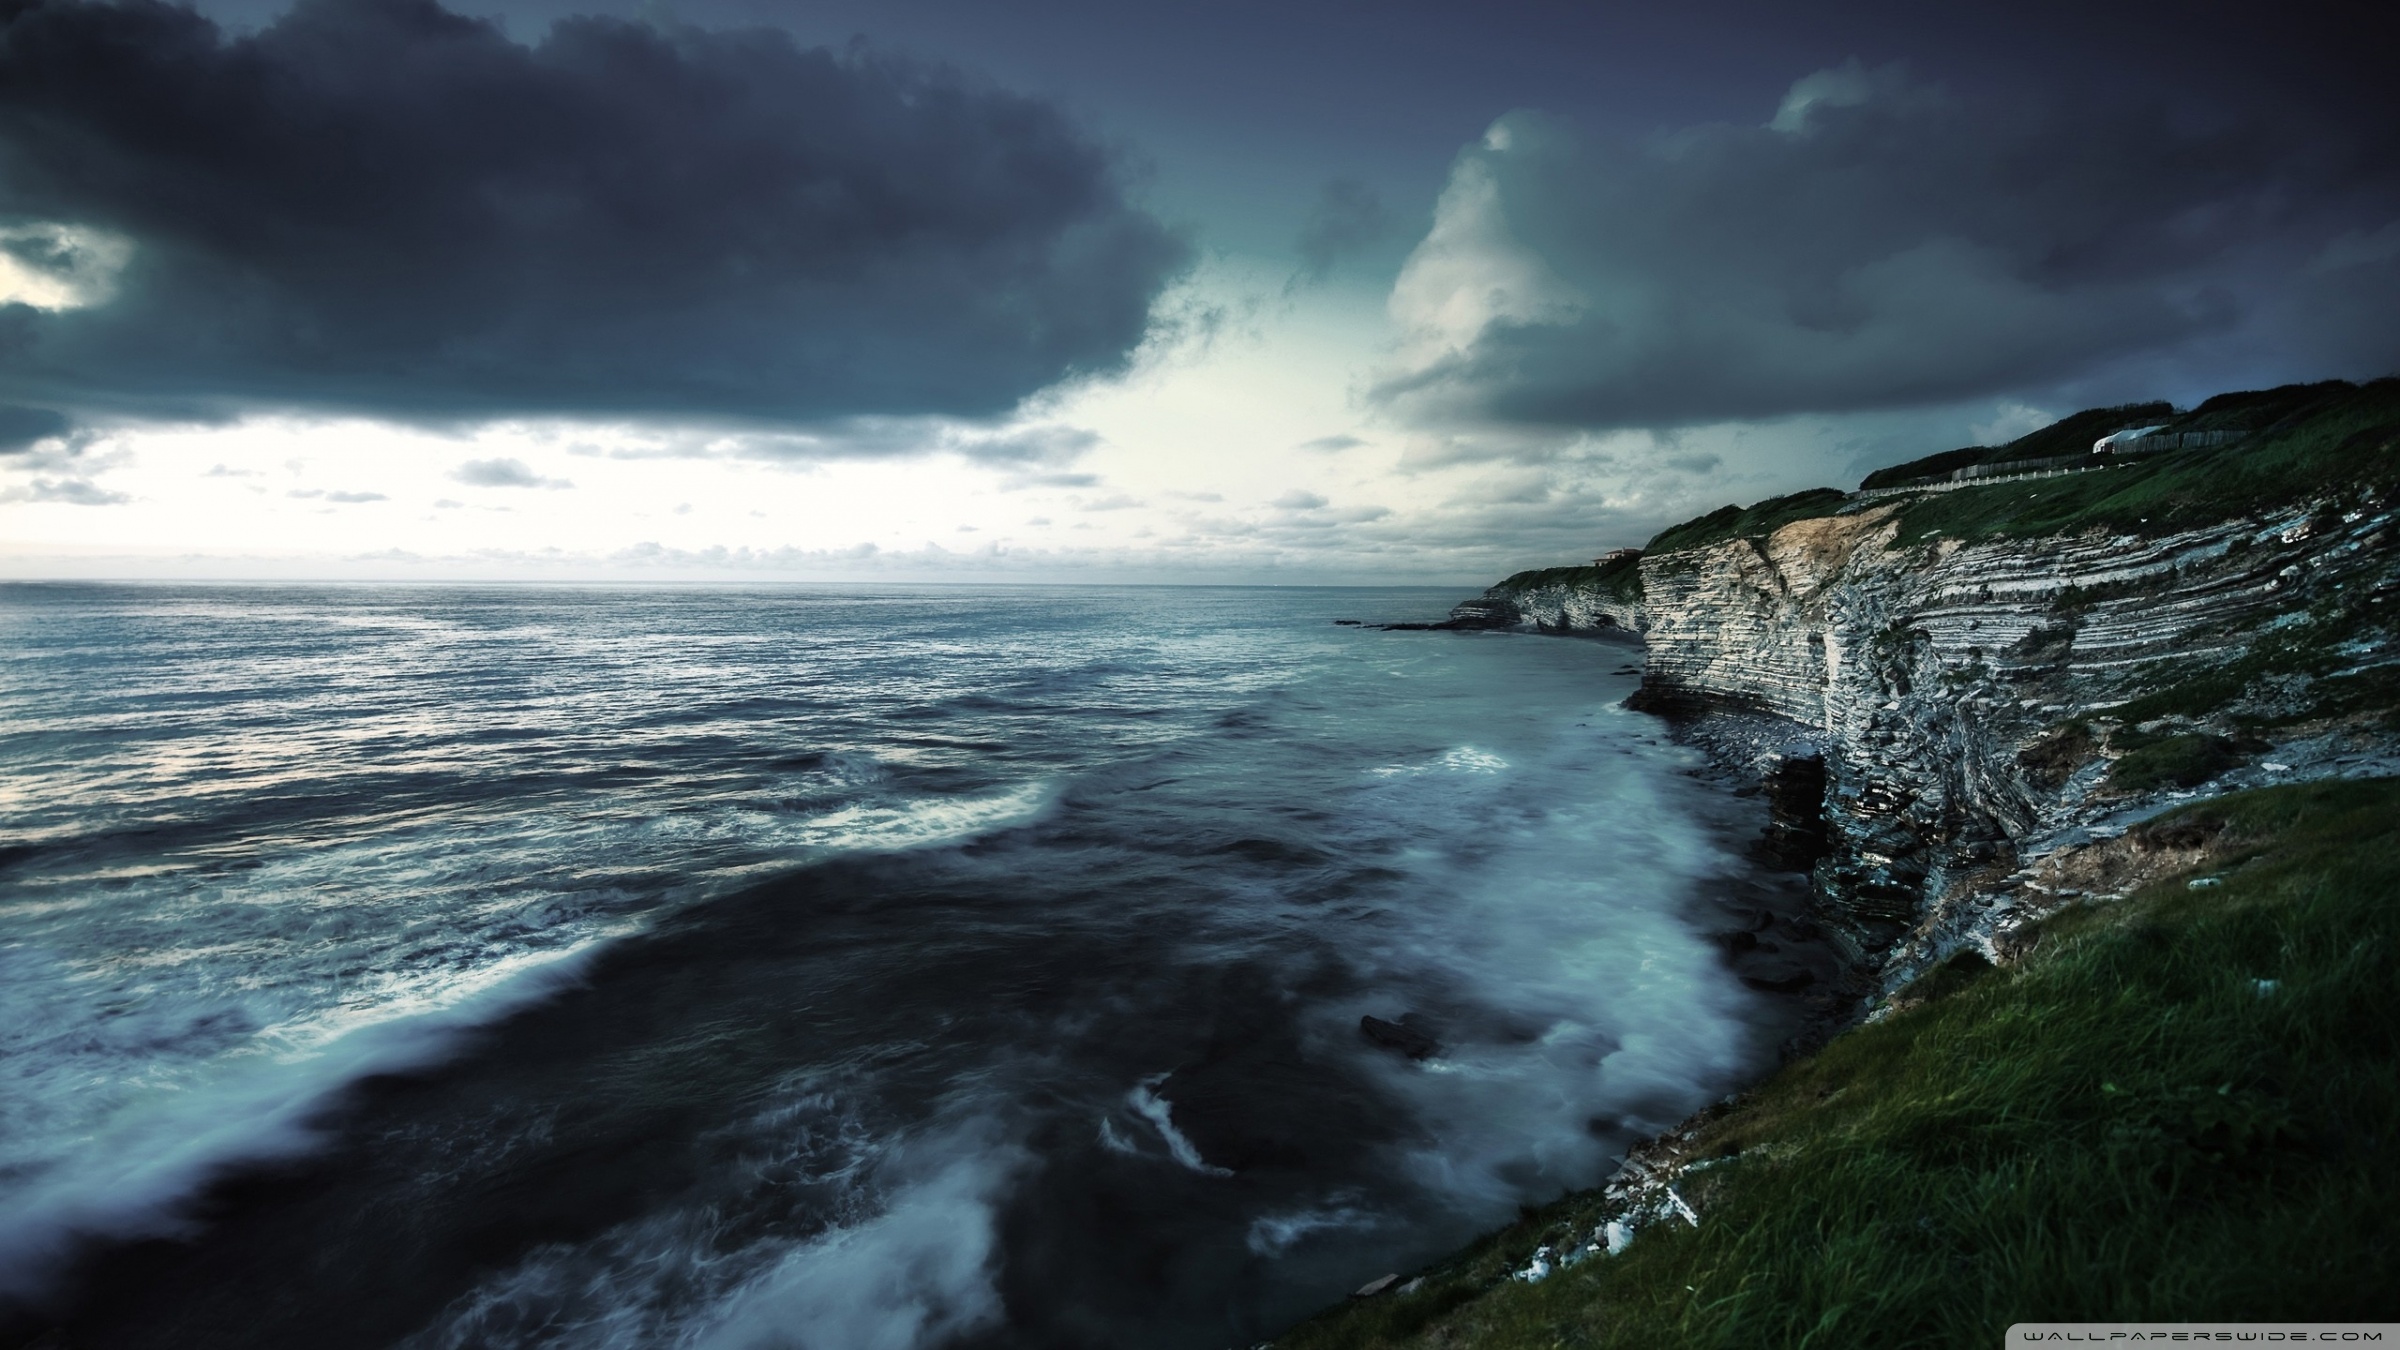 Coast, Stormy Weather Ultra HD Desktop Background Wallpaper for 4K UHD TV, Multi Display, Dual Monitor, Tablet